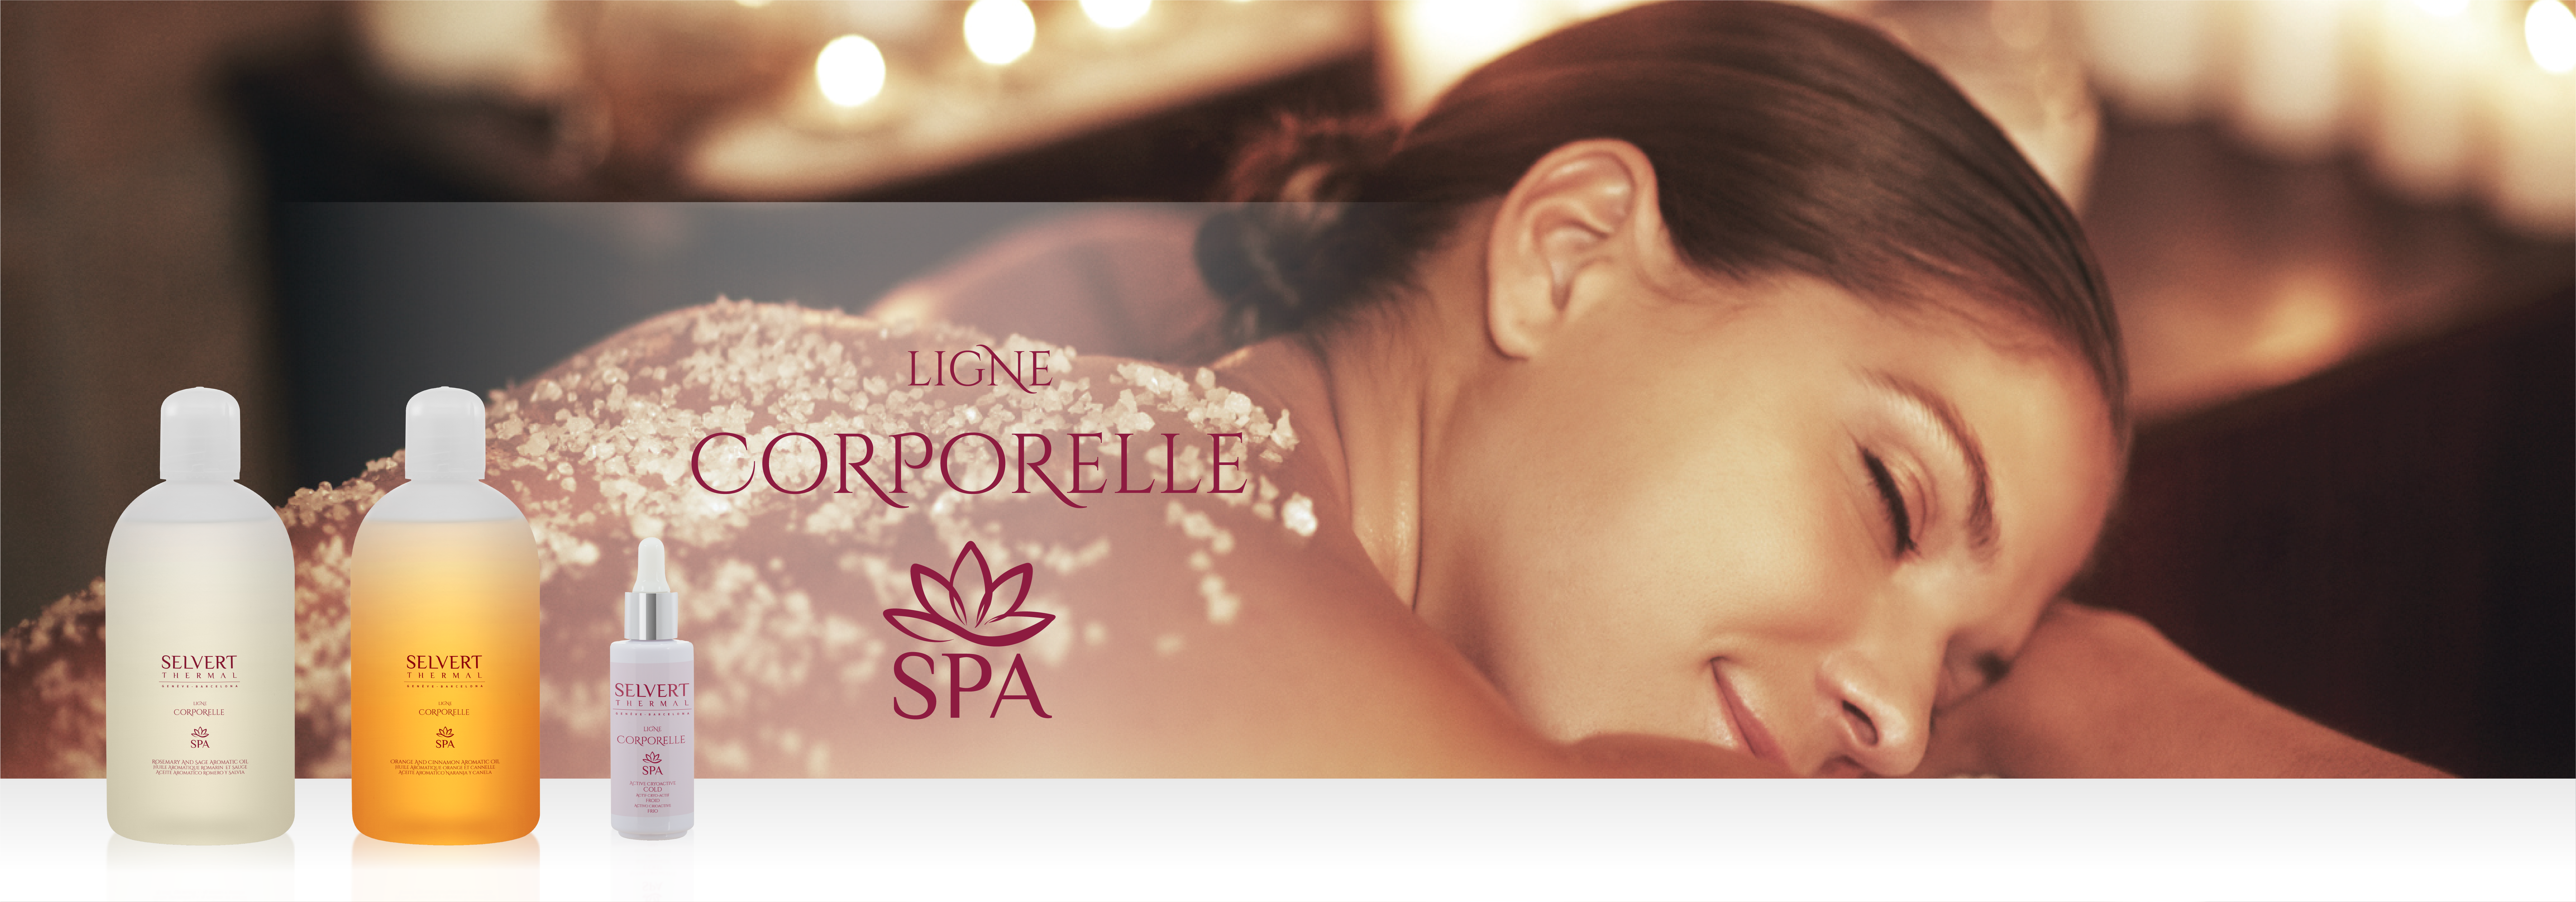 LIGNE CORPORELLE SPA <h4 style="text-align: center;">UNIQUE MOMENTS OF RELAXATION AND WELL-BEING FOR AESTHETIC MIND AND BODY</h4>
<p style="text-align: justify;">&nbsp;</p>
<p style="text-align: justify;">We have developed a whole philosophy of beauty which will submerge you in a unique state of incomparable well-being and relaxation, recovering harmony of mind and body.</p>
<p style="text-align: justify;">Let yourself be carried away on a unique journey for the senses and discover the 4 exclusive rituals which, together with the use of the most innovative and effective products in the world, and the professional&rsquo;s &ldquo;expertise&rdquo;, will make your skin shine with incomparable beauty.</p>
<p>Get more information about the professional products and protocols of the line <a title="Contact" href="https://www.selvertthermal.com/en/contact" target="_blank">contacting</a> us.</p>